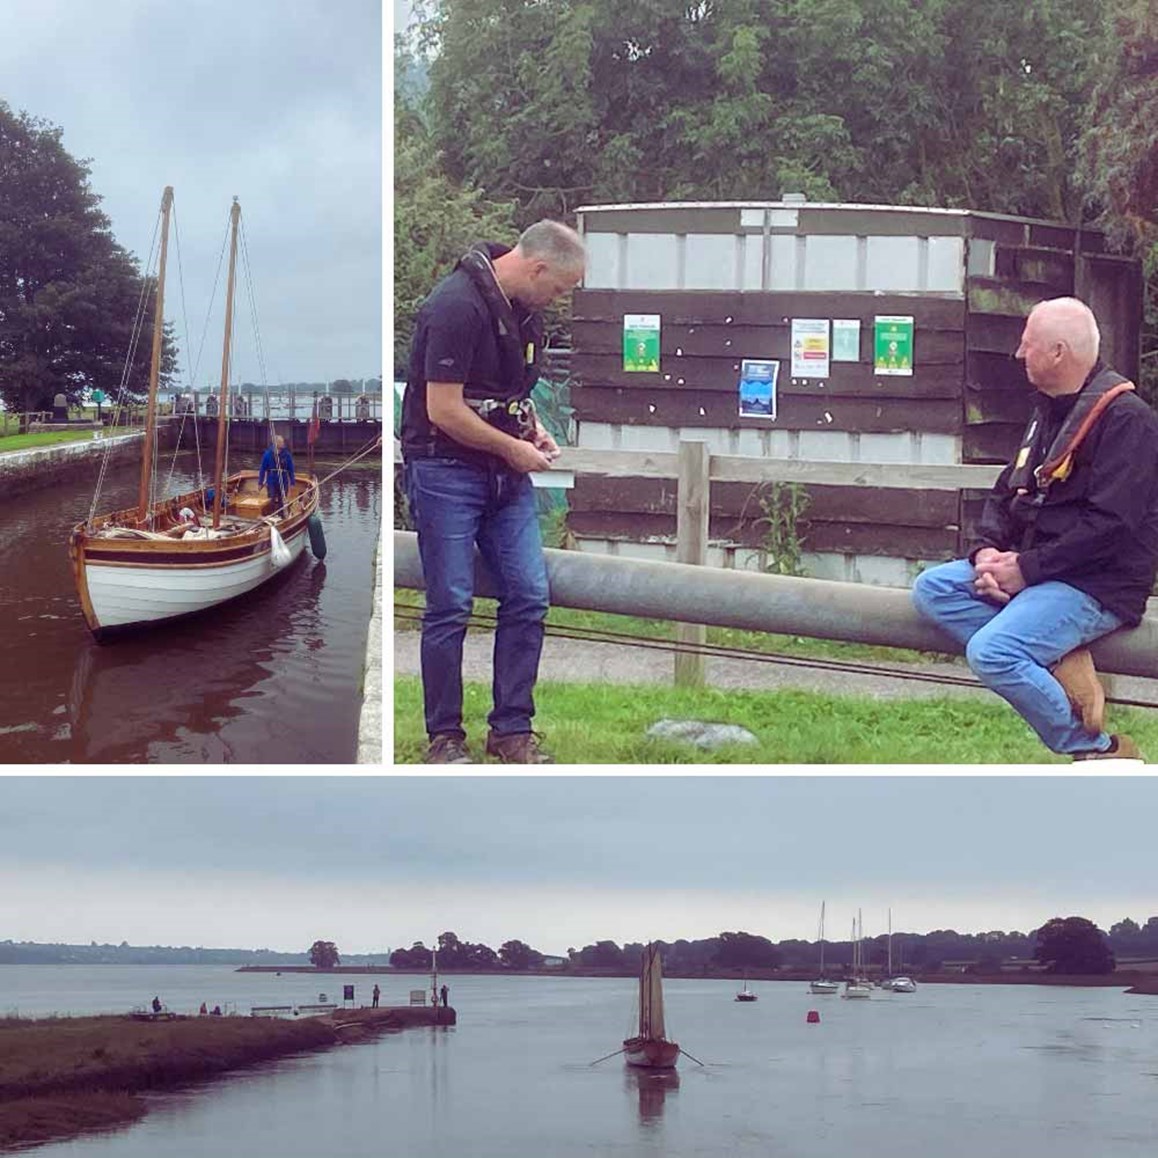 Staff from the City Council’s Waterways team have been taking part in filming for a new TV programme exploring the history of the Exe Estuary and the Exeter Ship Canal